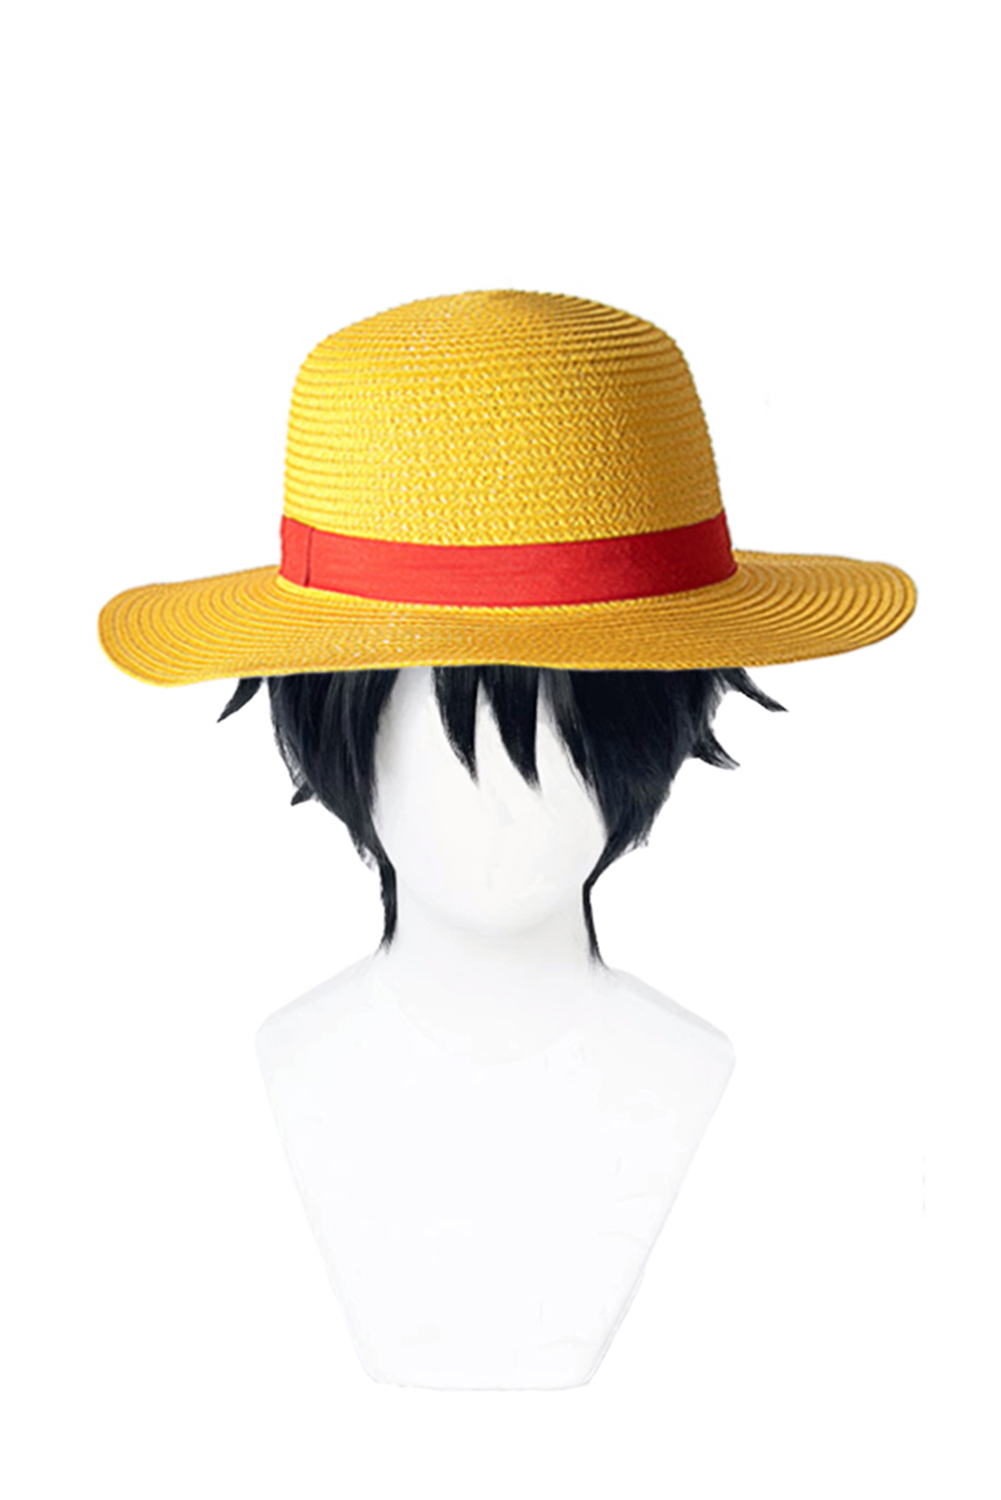 Anime One Piece Monkey D. Luffy Wig Hat Set Cosplay Accessories Carnival Halloween Party Props Costume Accessories